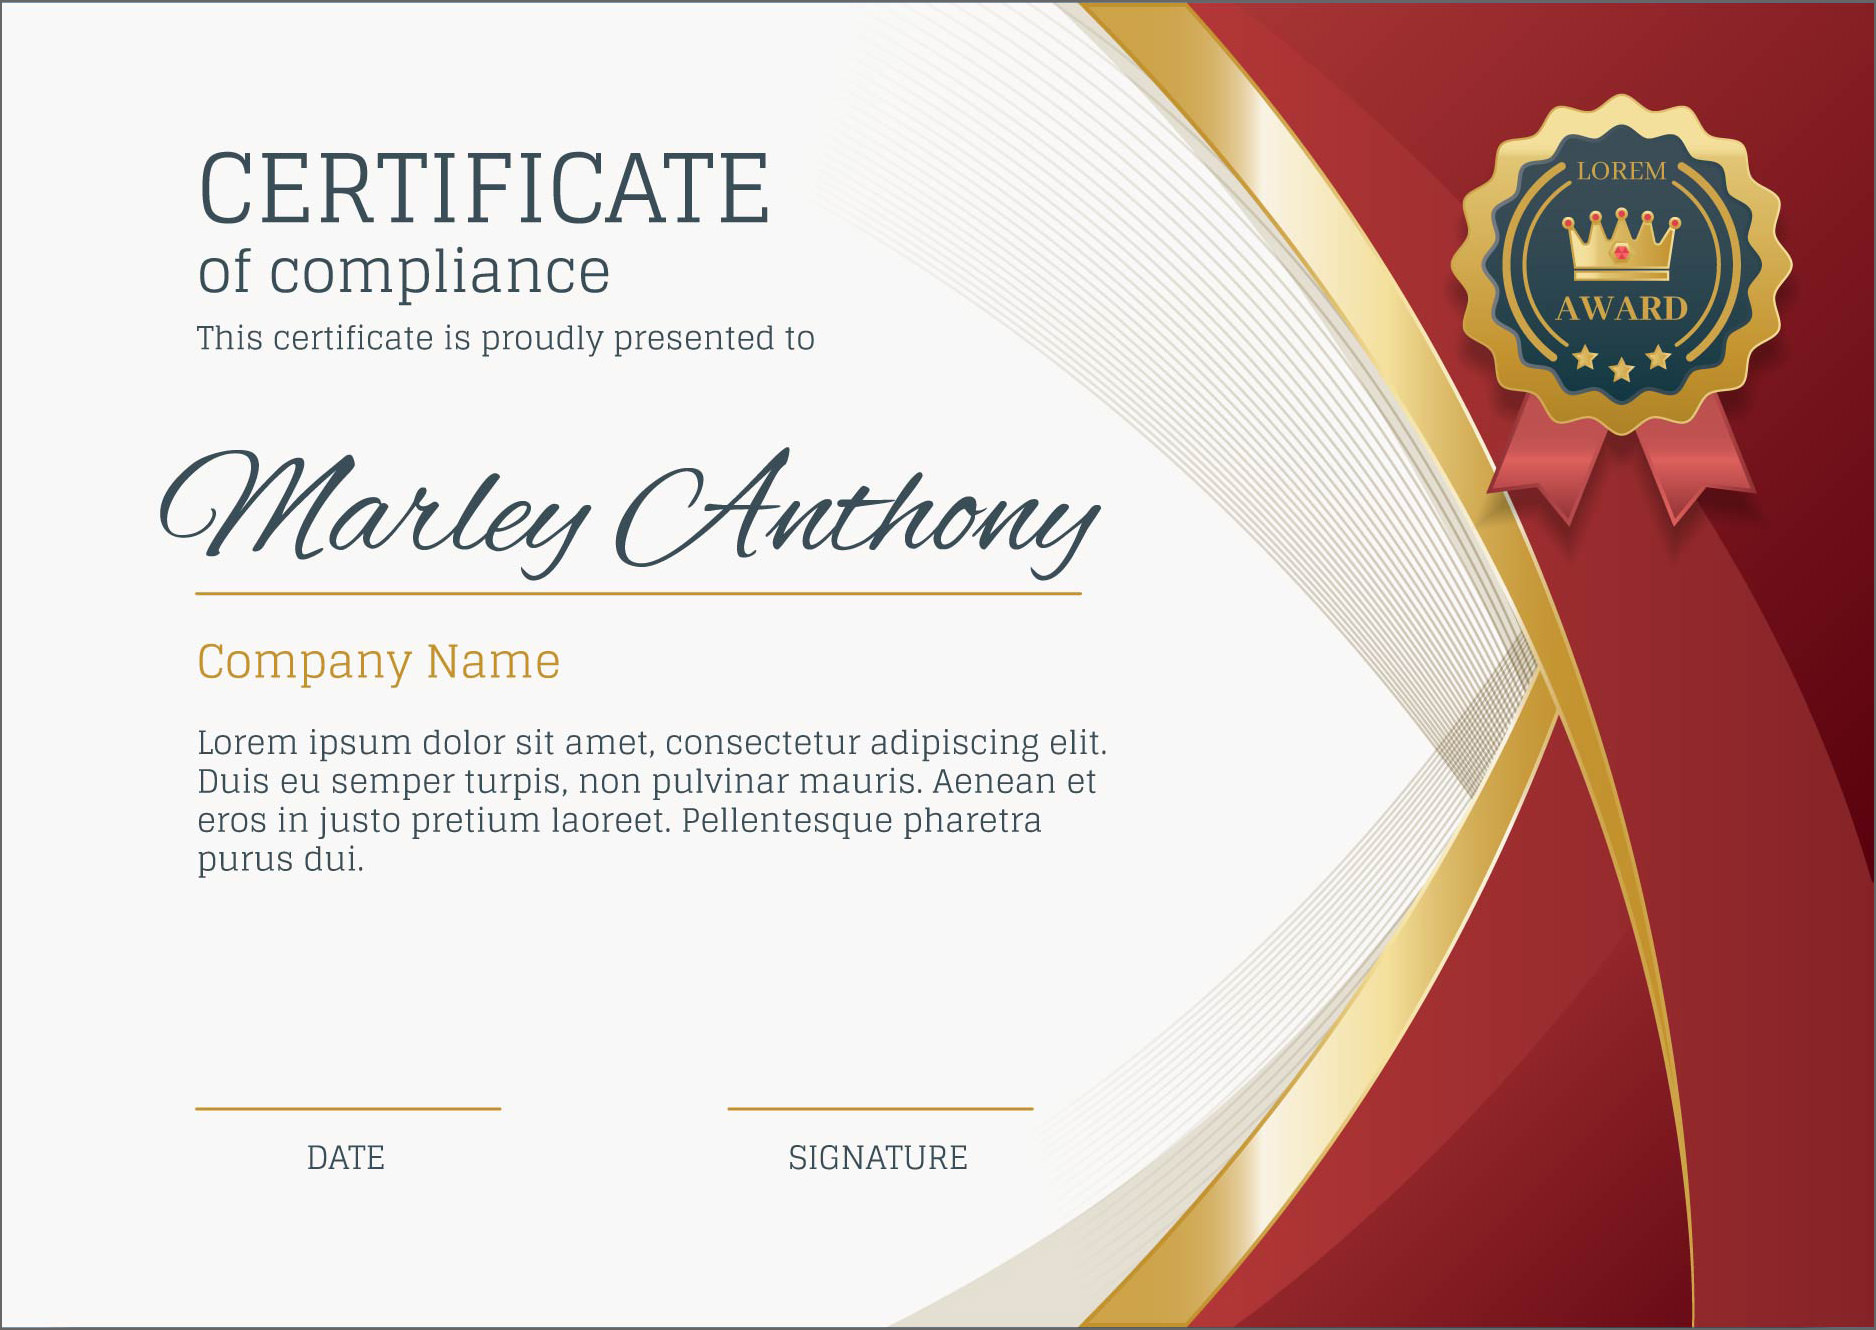 50 Free Creative Blank Certificate Templates In PSD Photoshop Vector